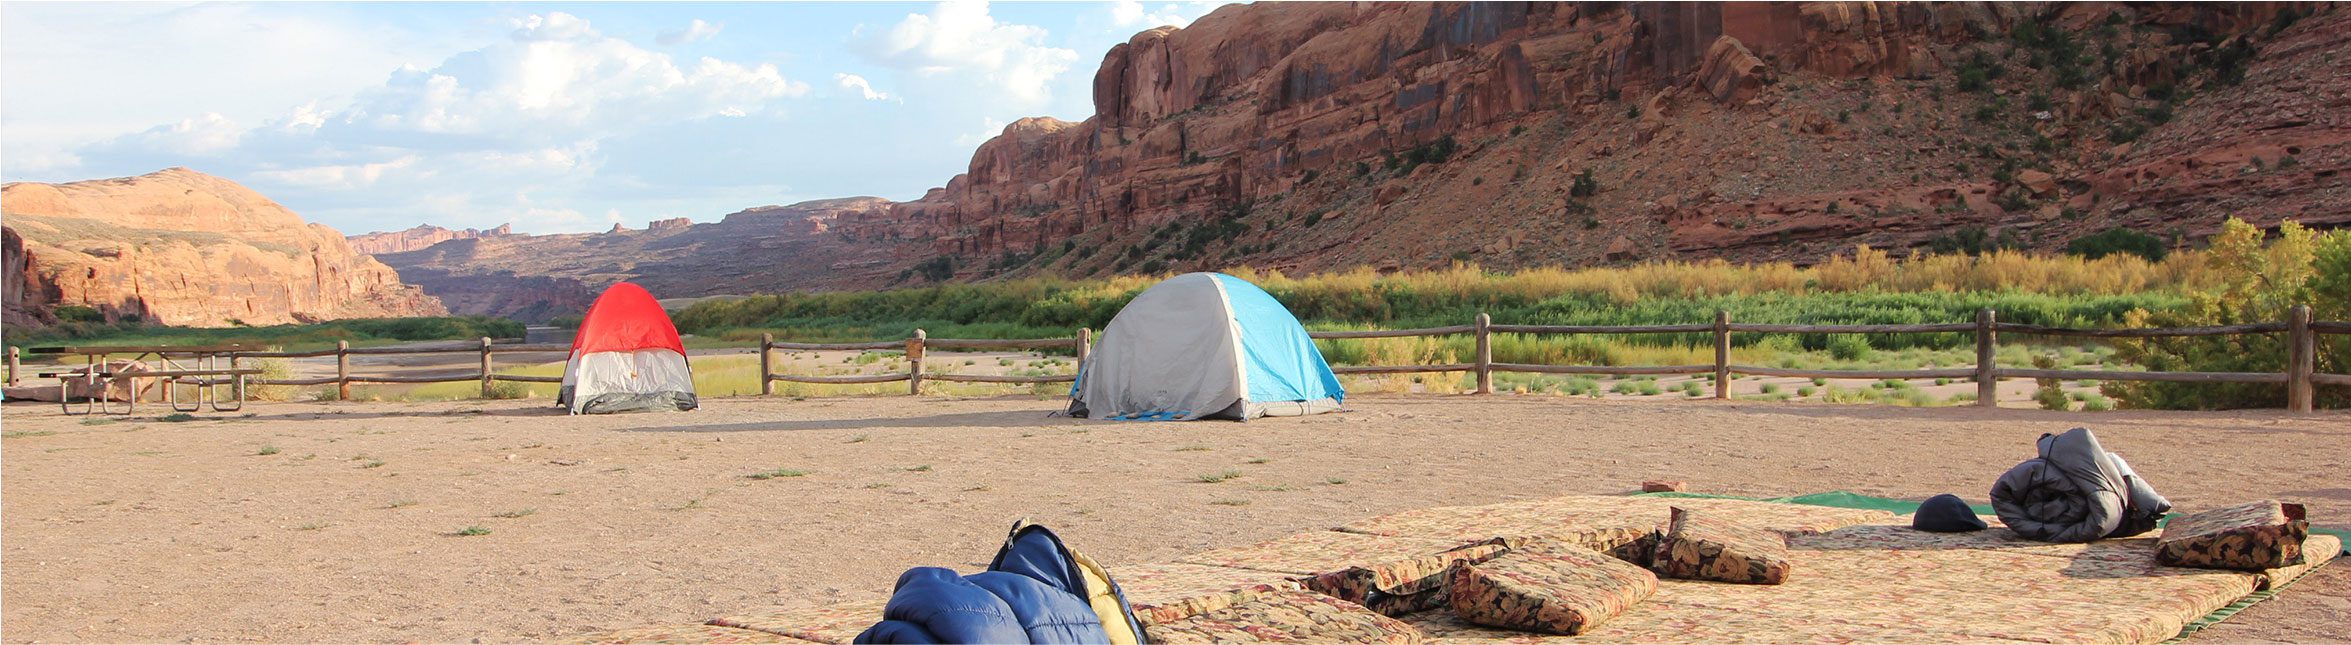 Tents and sleeping bags in a canyon setting on a Green Tortoise adventure